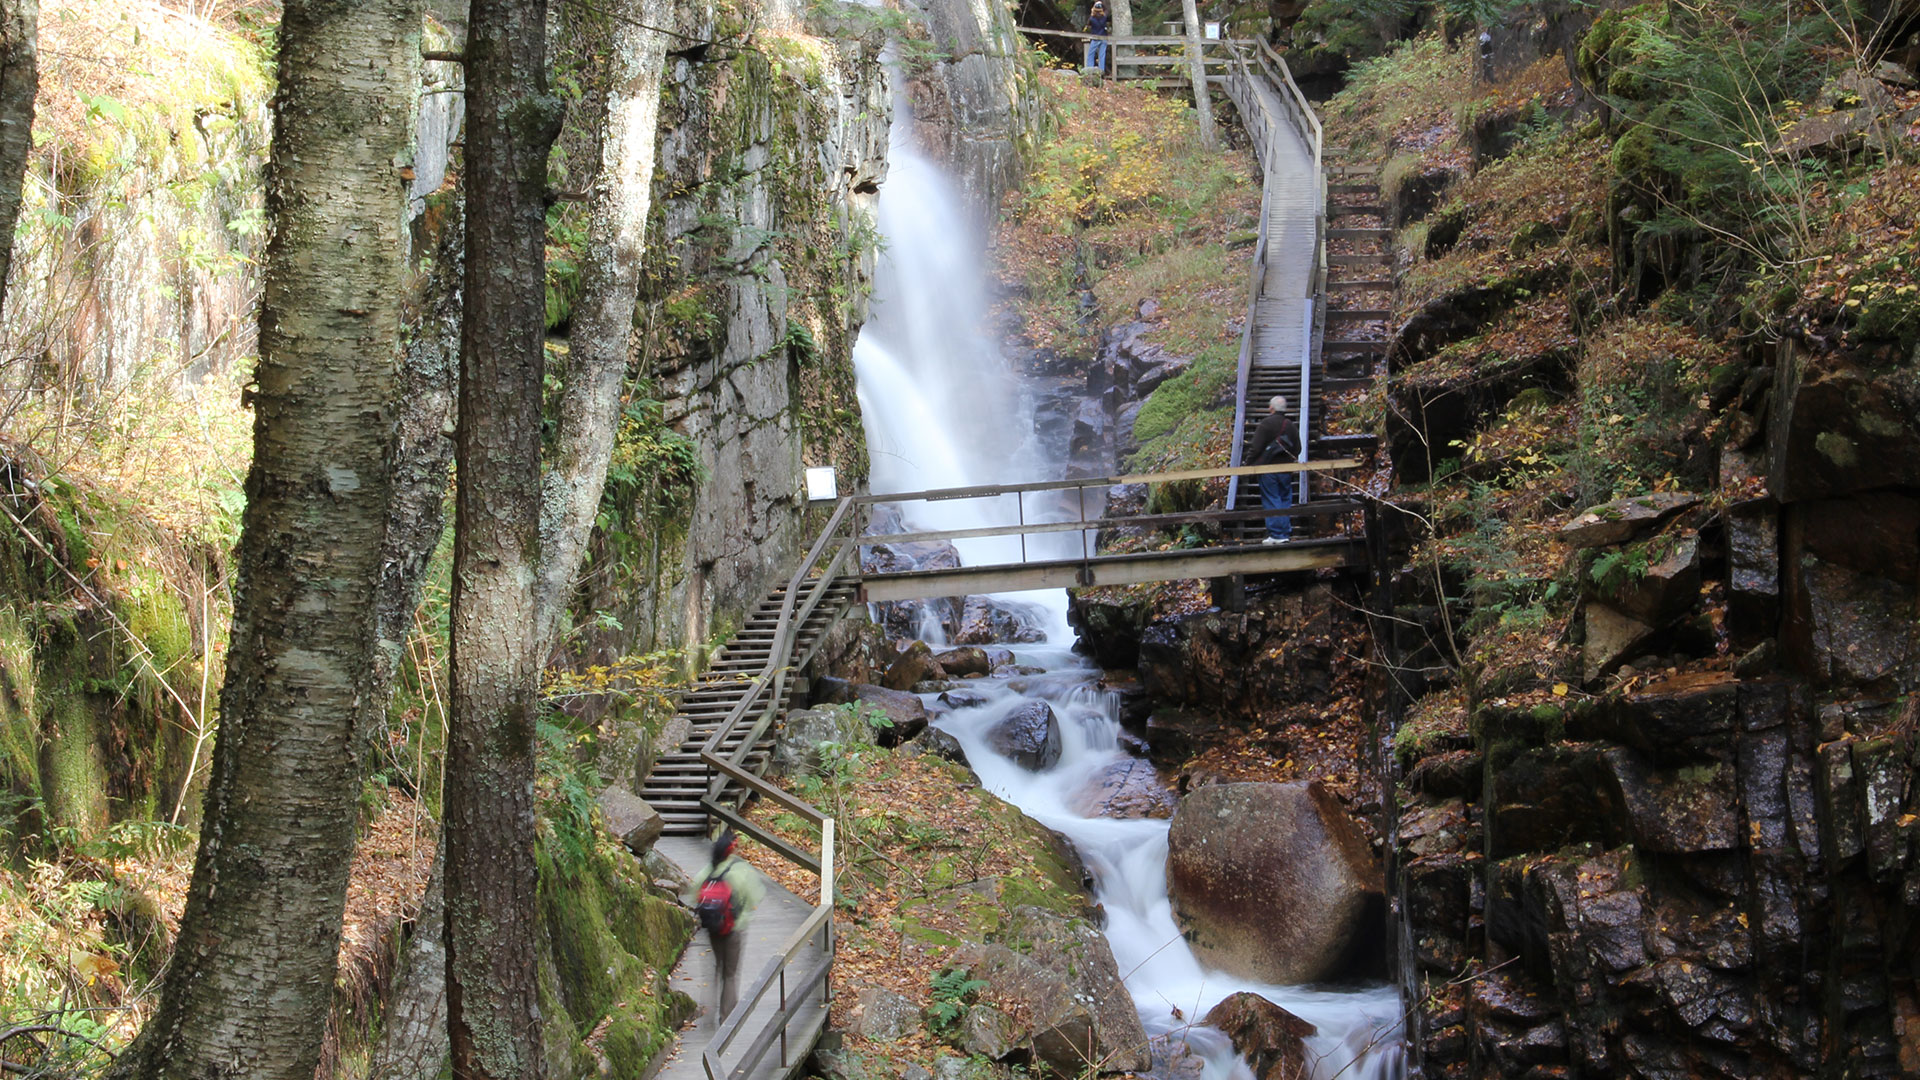 Stairs in gorge